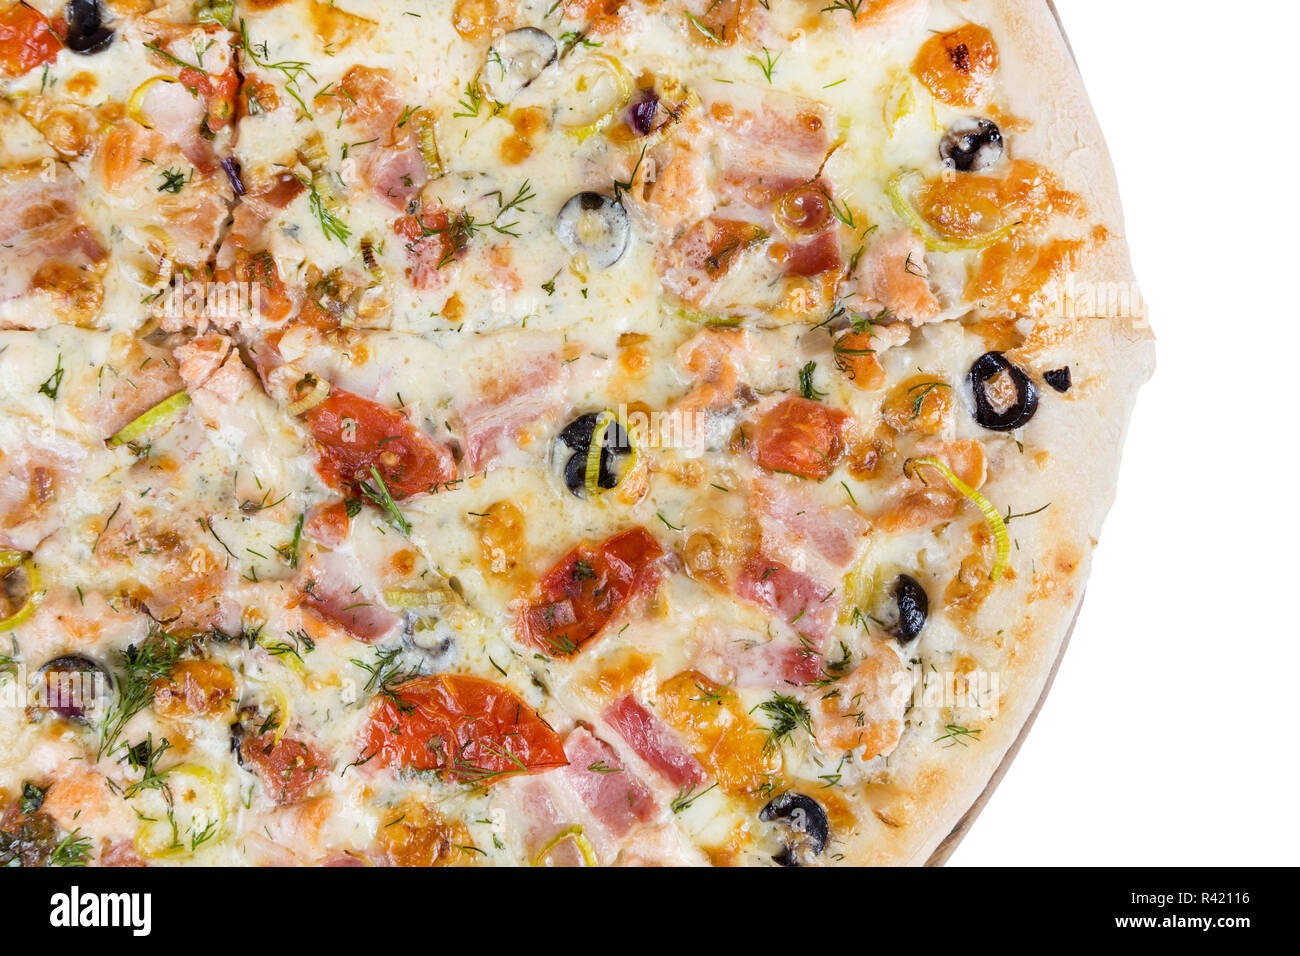 fresh hot fast food slices of pizza Stock Photo